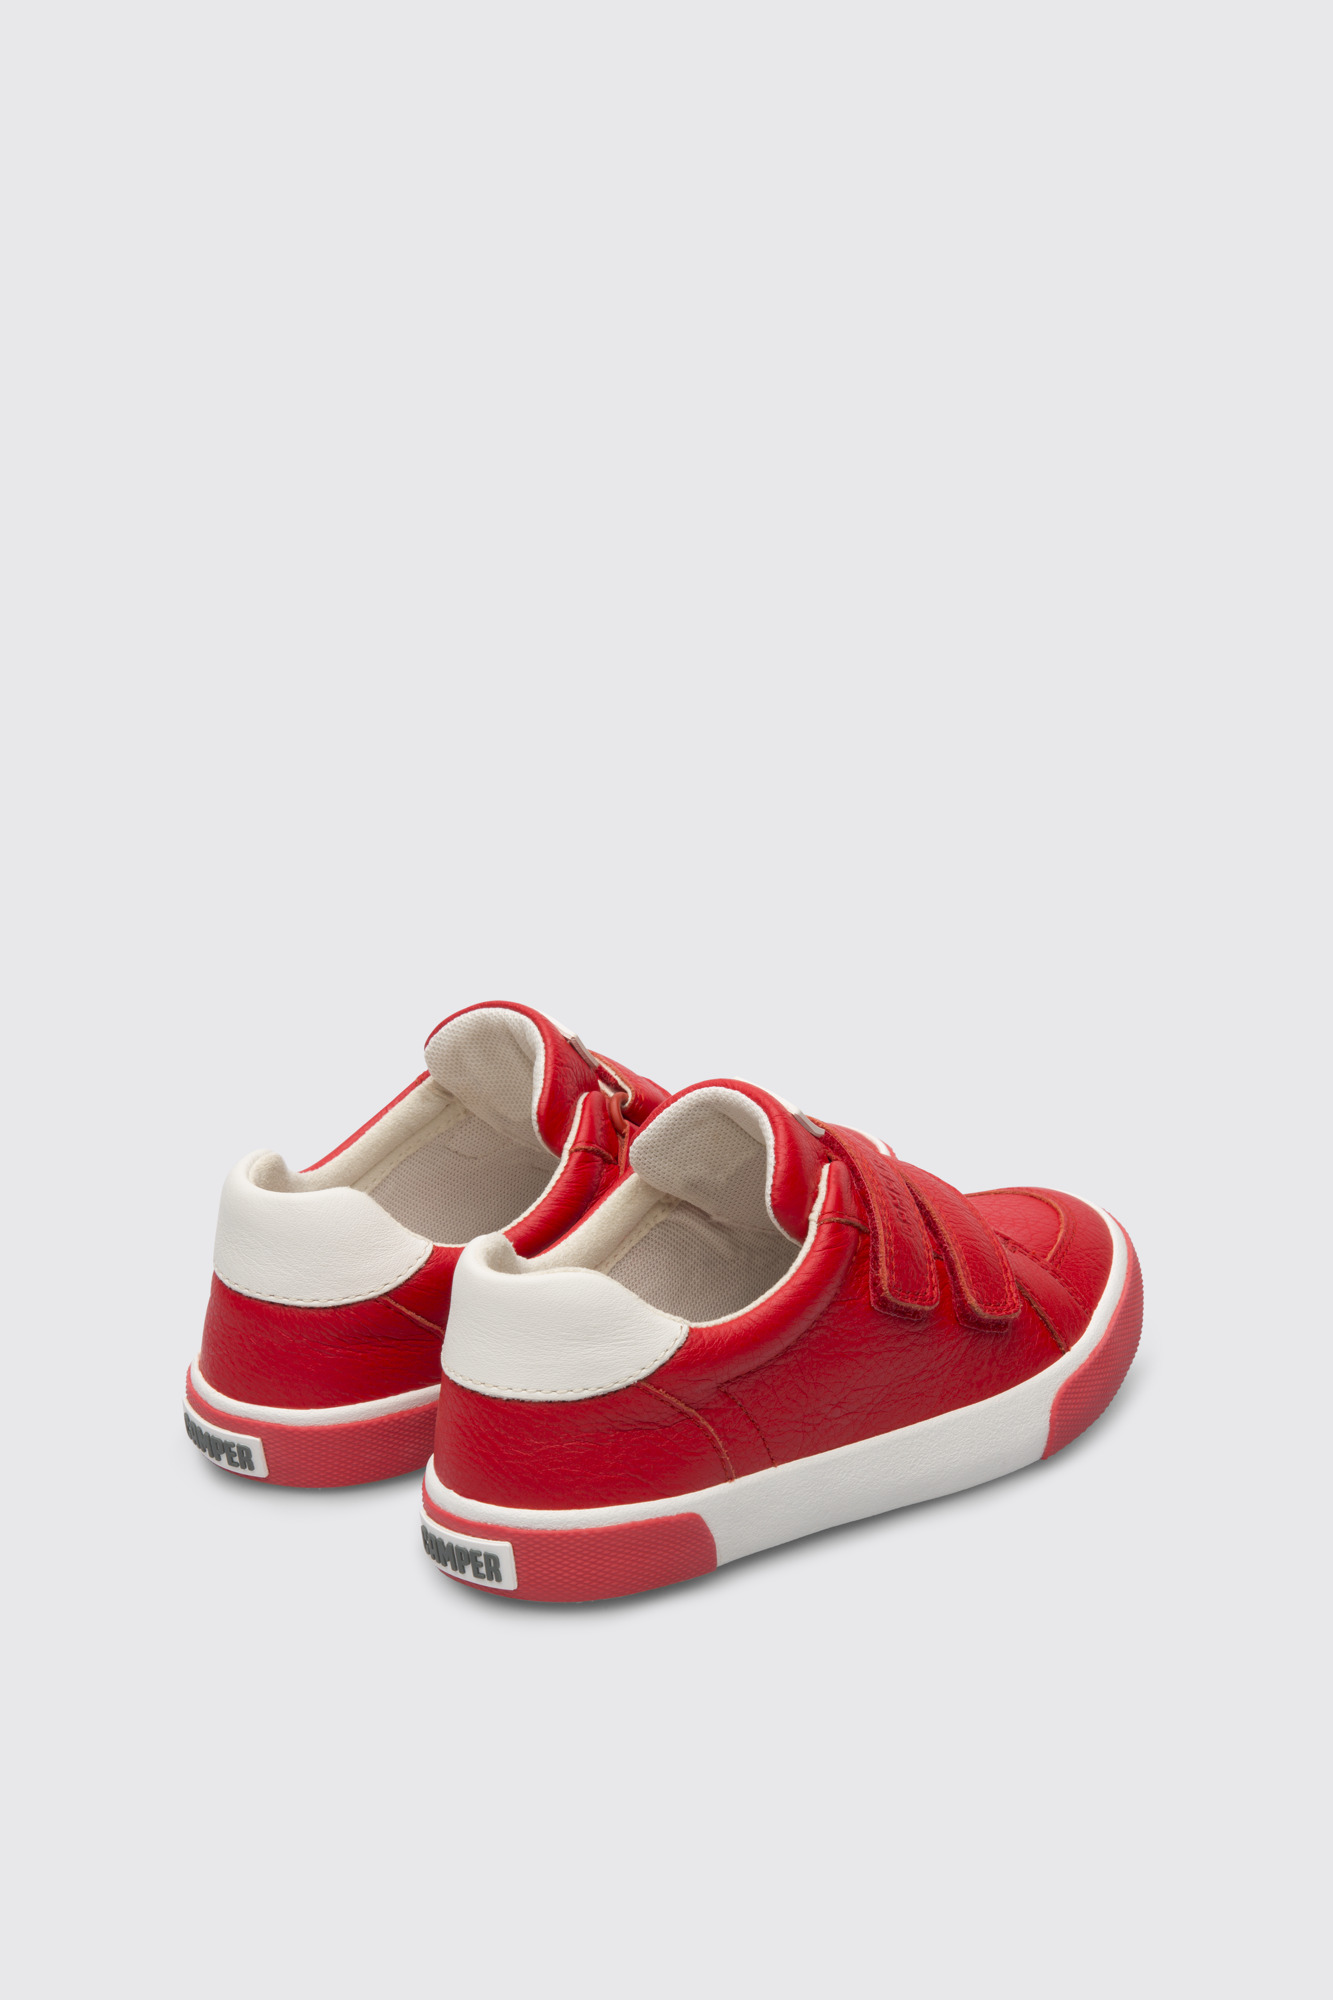 Pursuit Sneakers for Kids - Spring/Summer collection - Camper Australia